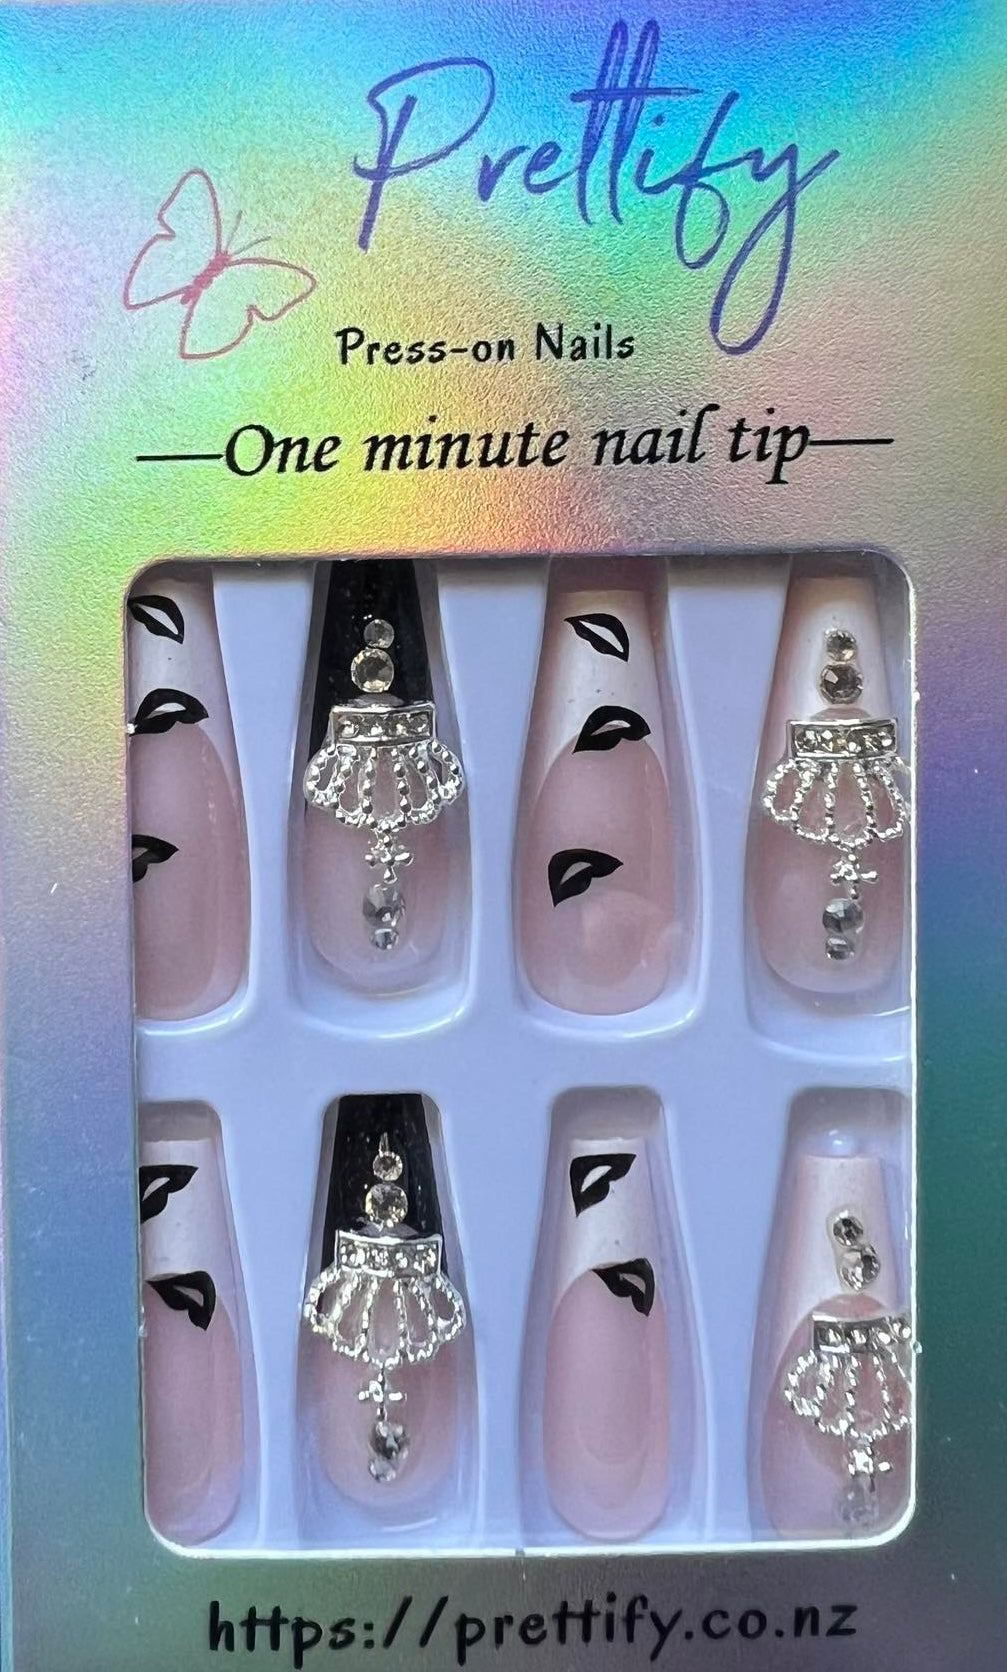 Long Coffin Press on Nails. White & Black Lips/Crowns. Easy and quick to apply. Great for those special occasions, parties or add an edge to any outfit. Gorgeous, flattering and you can re-use them again and again.